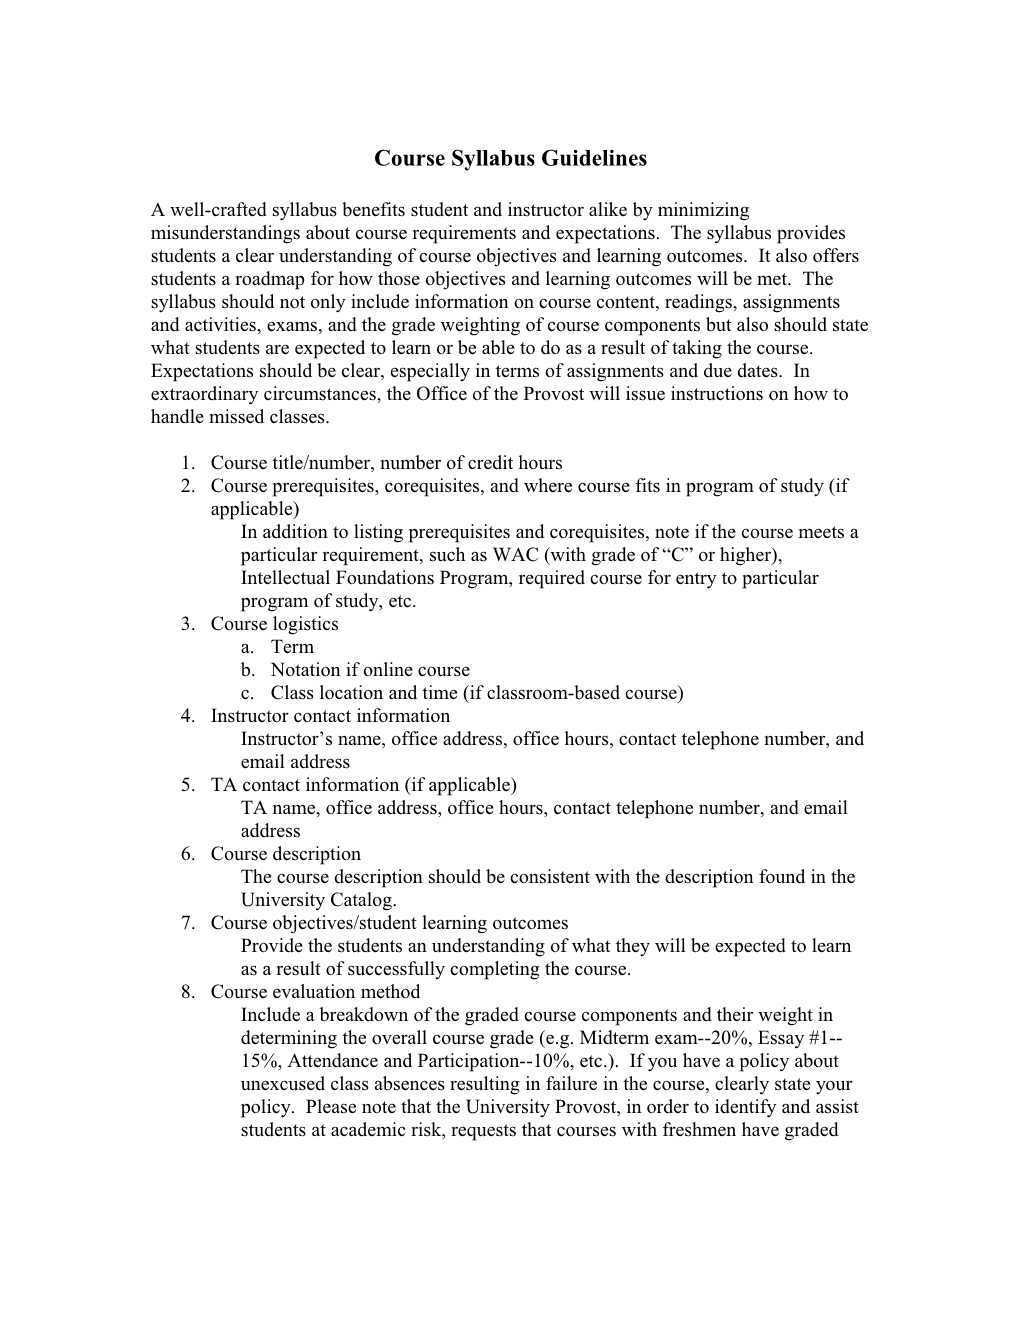 Requirements for Course Syllabi